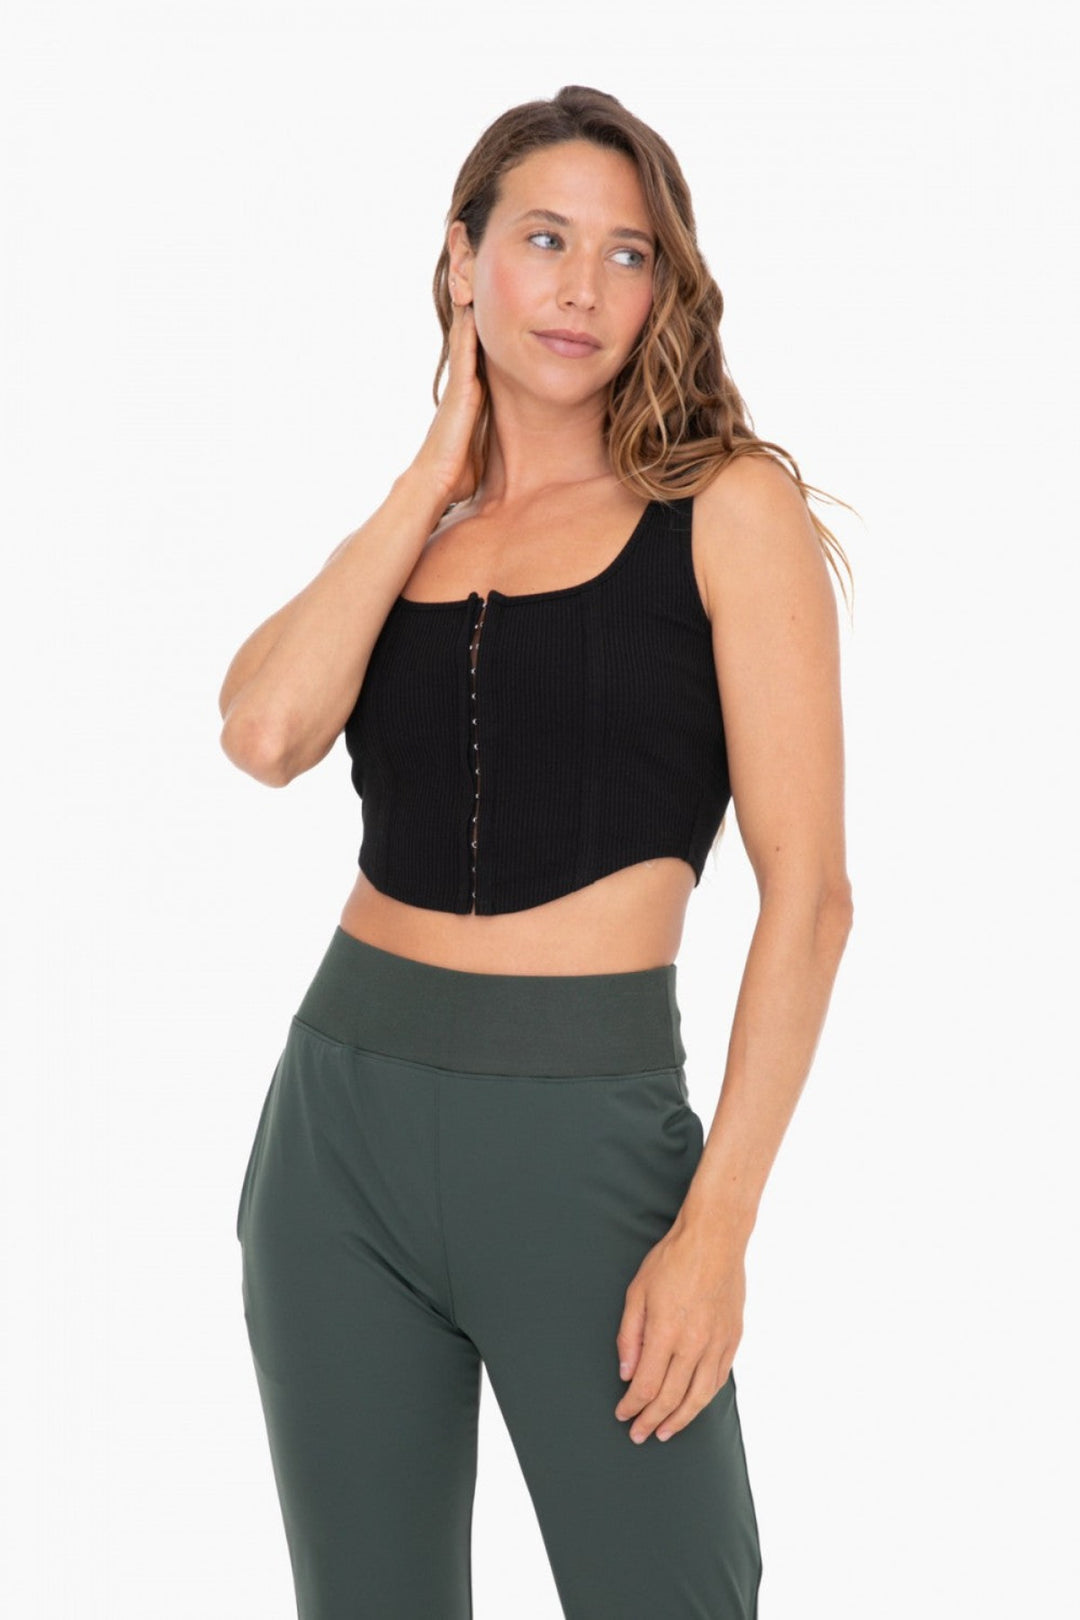 Be cute and comfy in this corset style rib top. Made from a cotton blend fabric, this top features a full front hook and eye closure, a contoured hem, and a flattering square neckline.